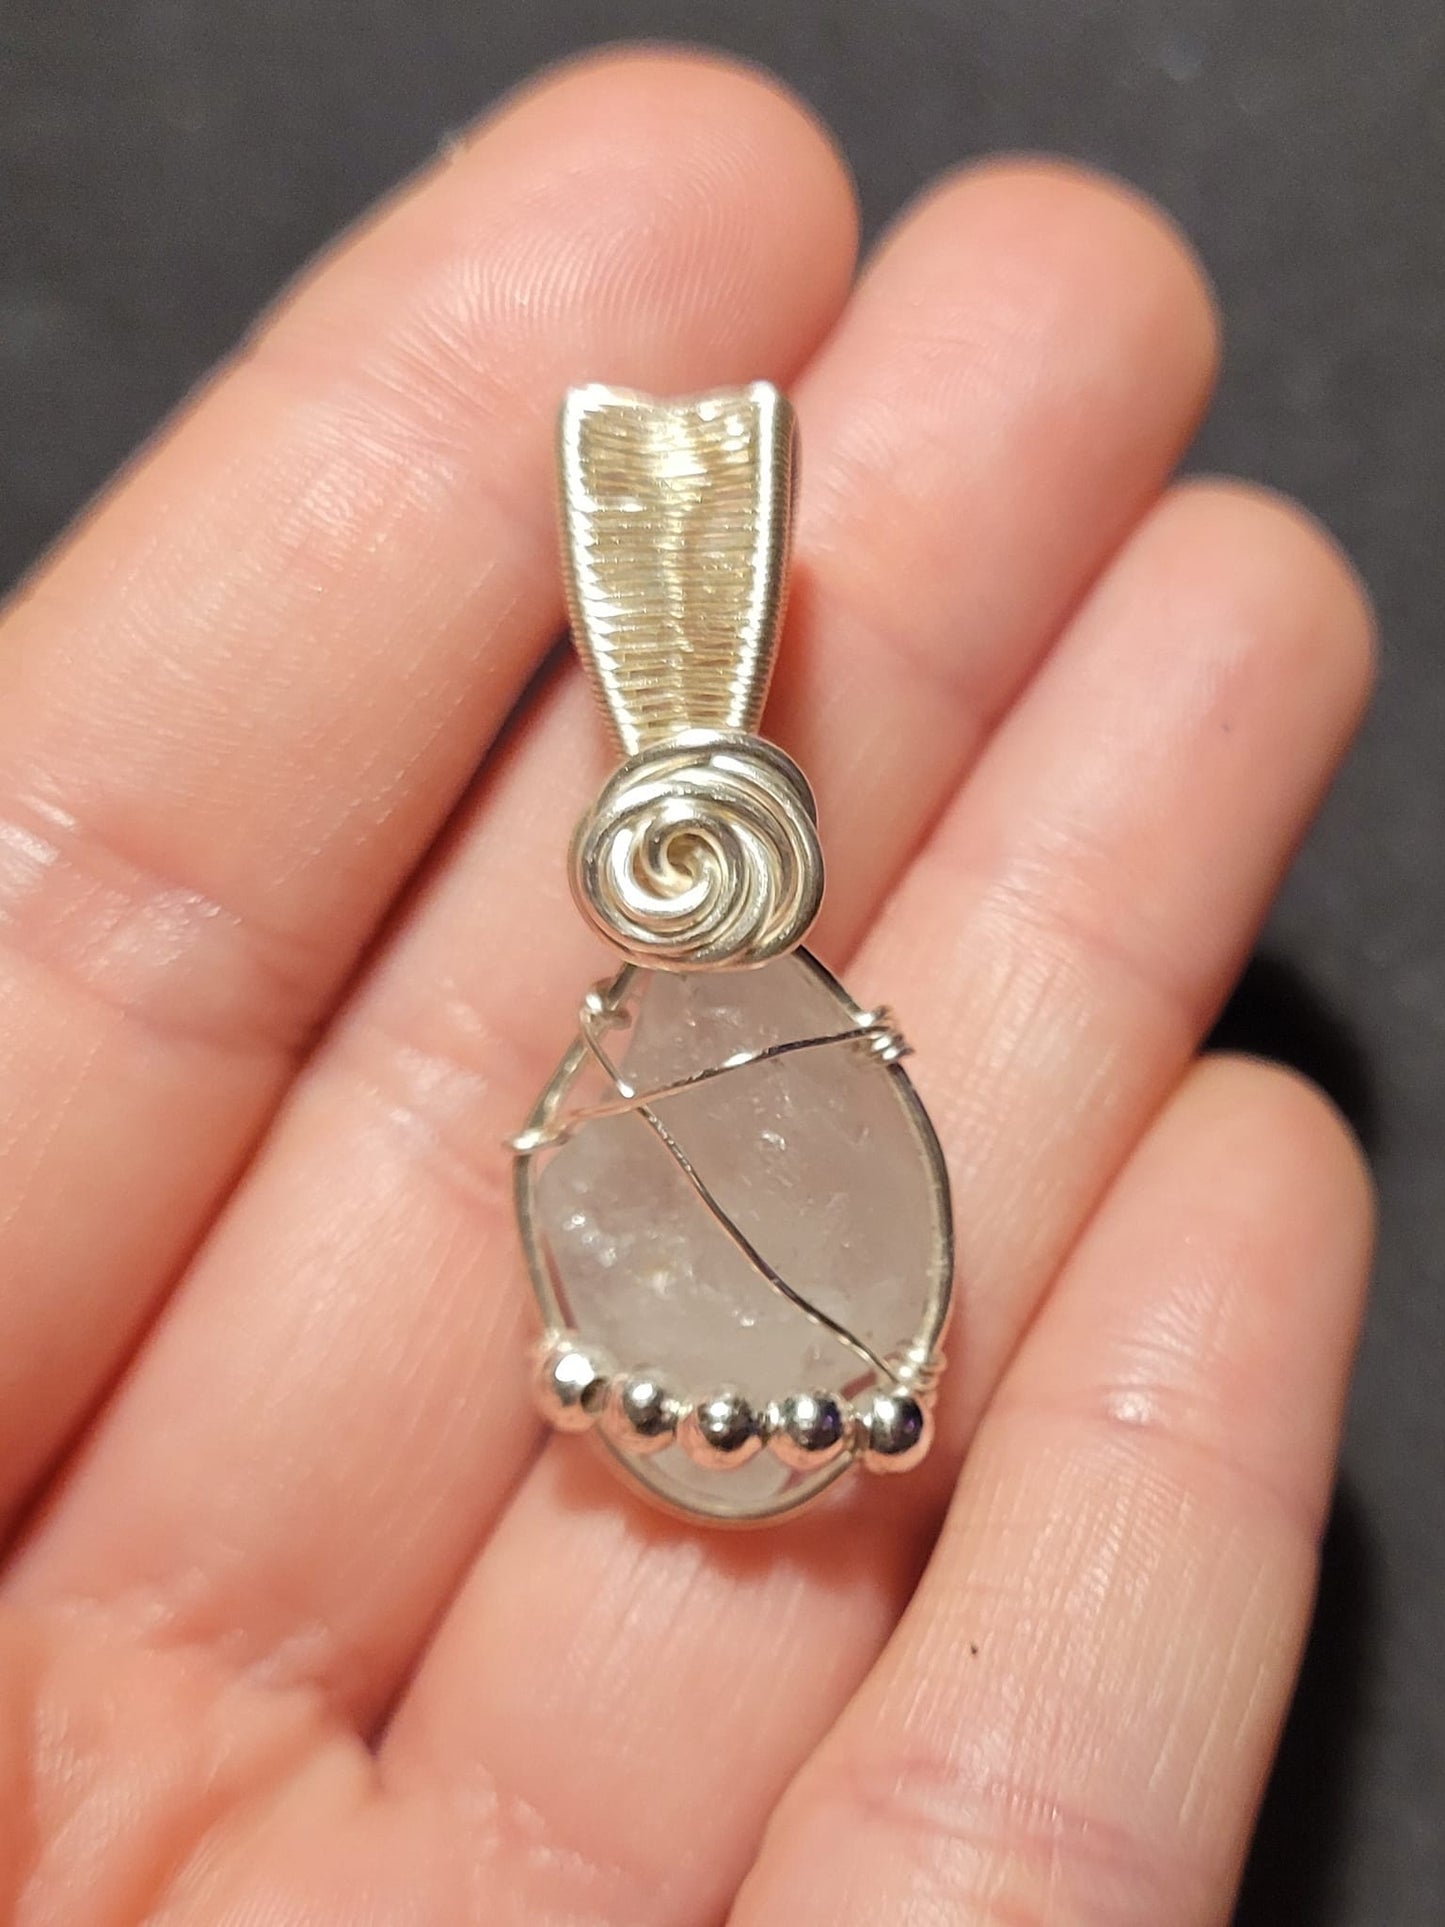 Blue Topaz pendant and its rose